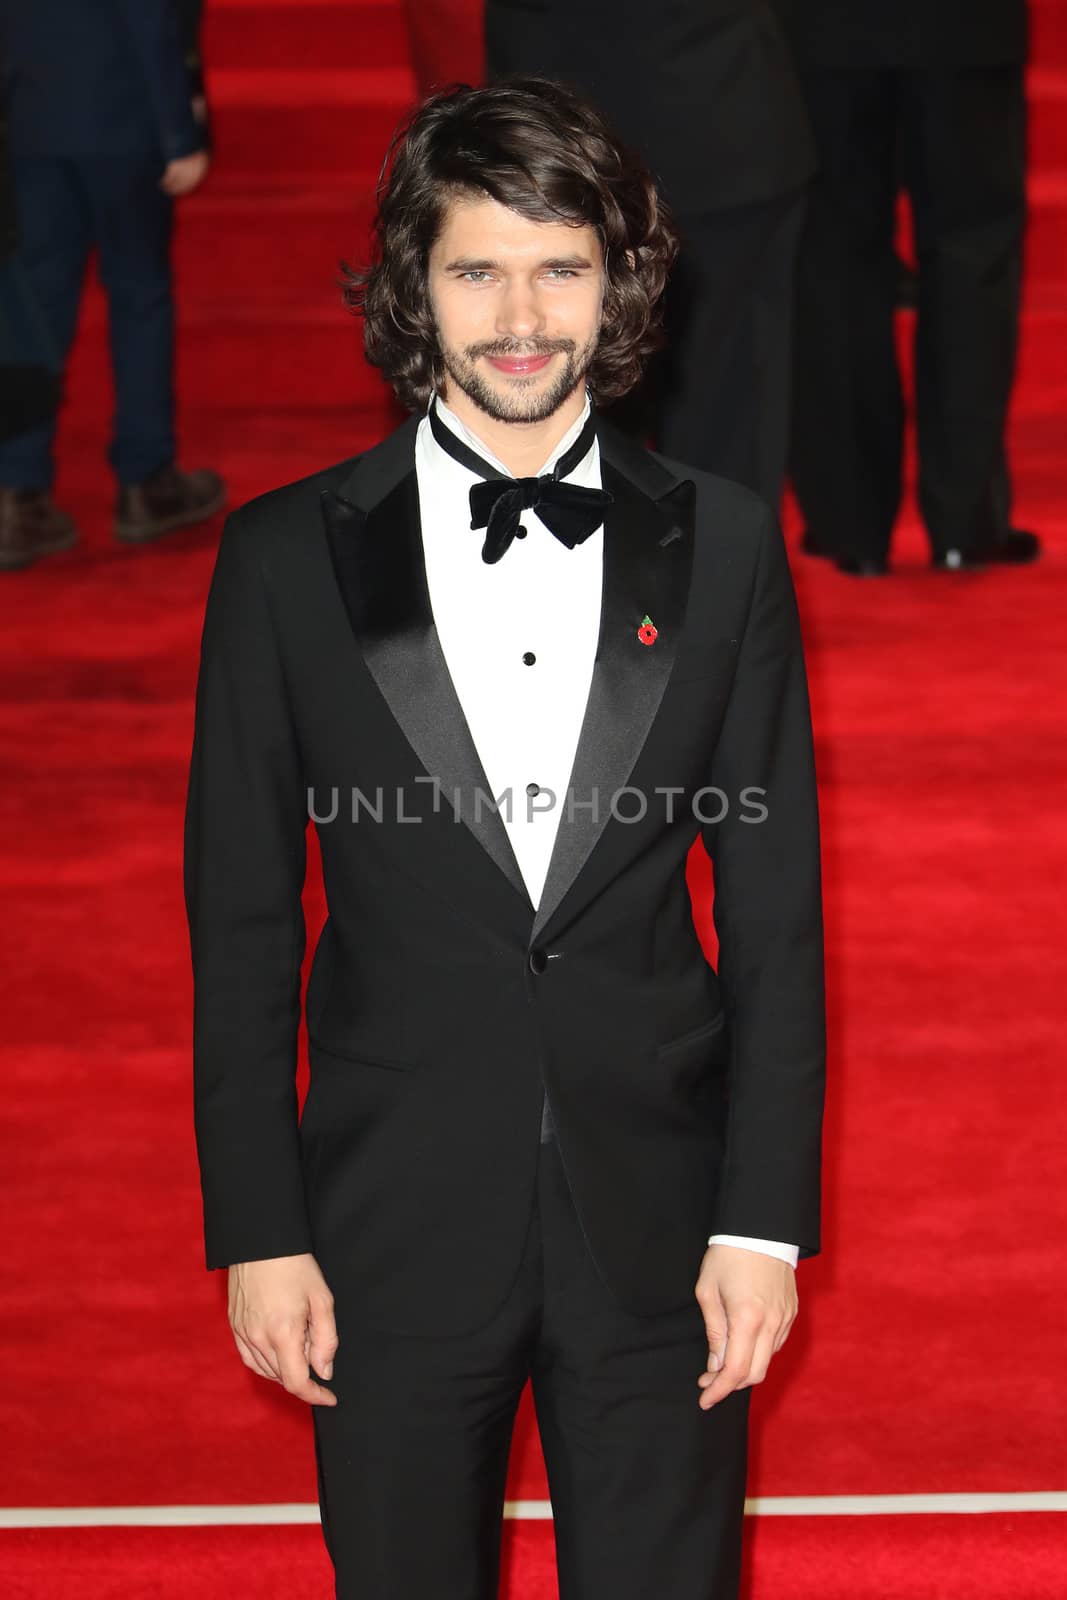 UNITED KINGDOM, London: Ben Whishaw attends the world premiere of the latest Bond film, Spectre, at Royal Albert Hall in London on October 26, 2015.